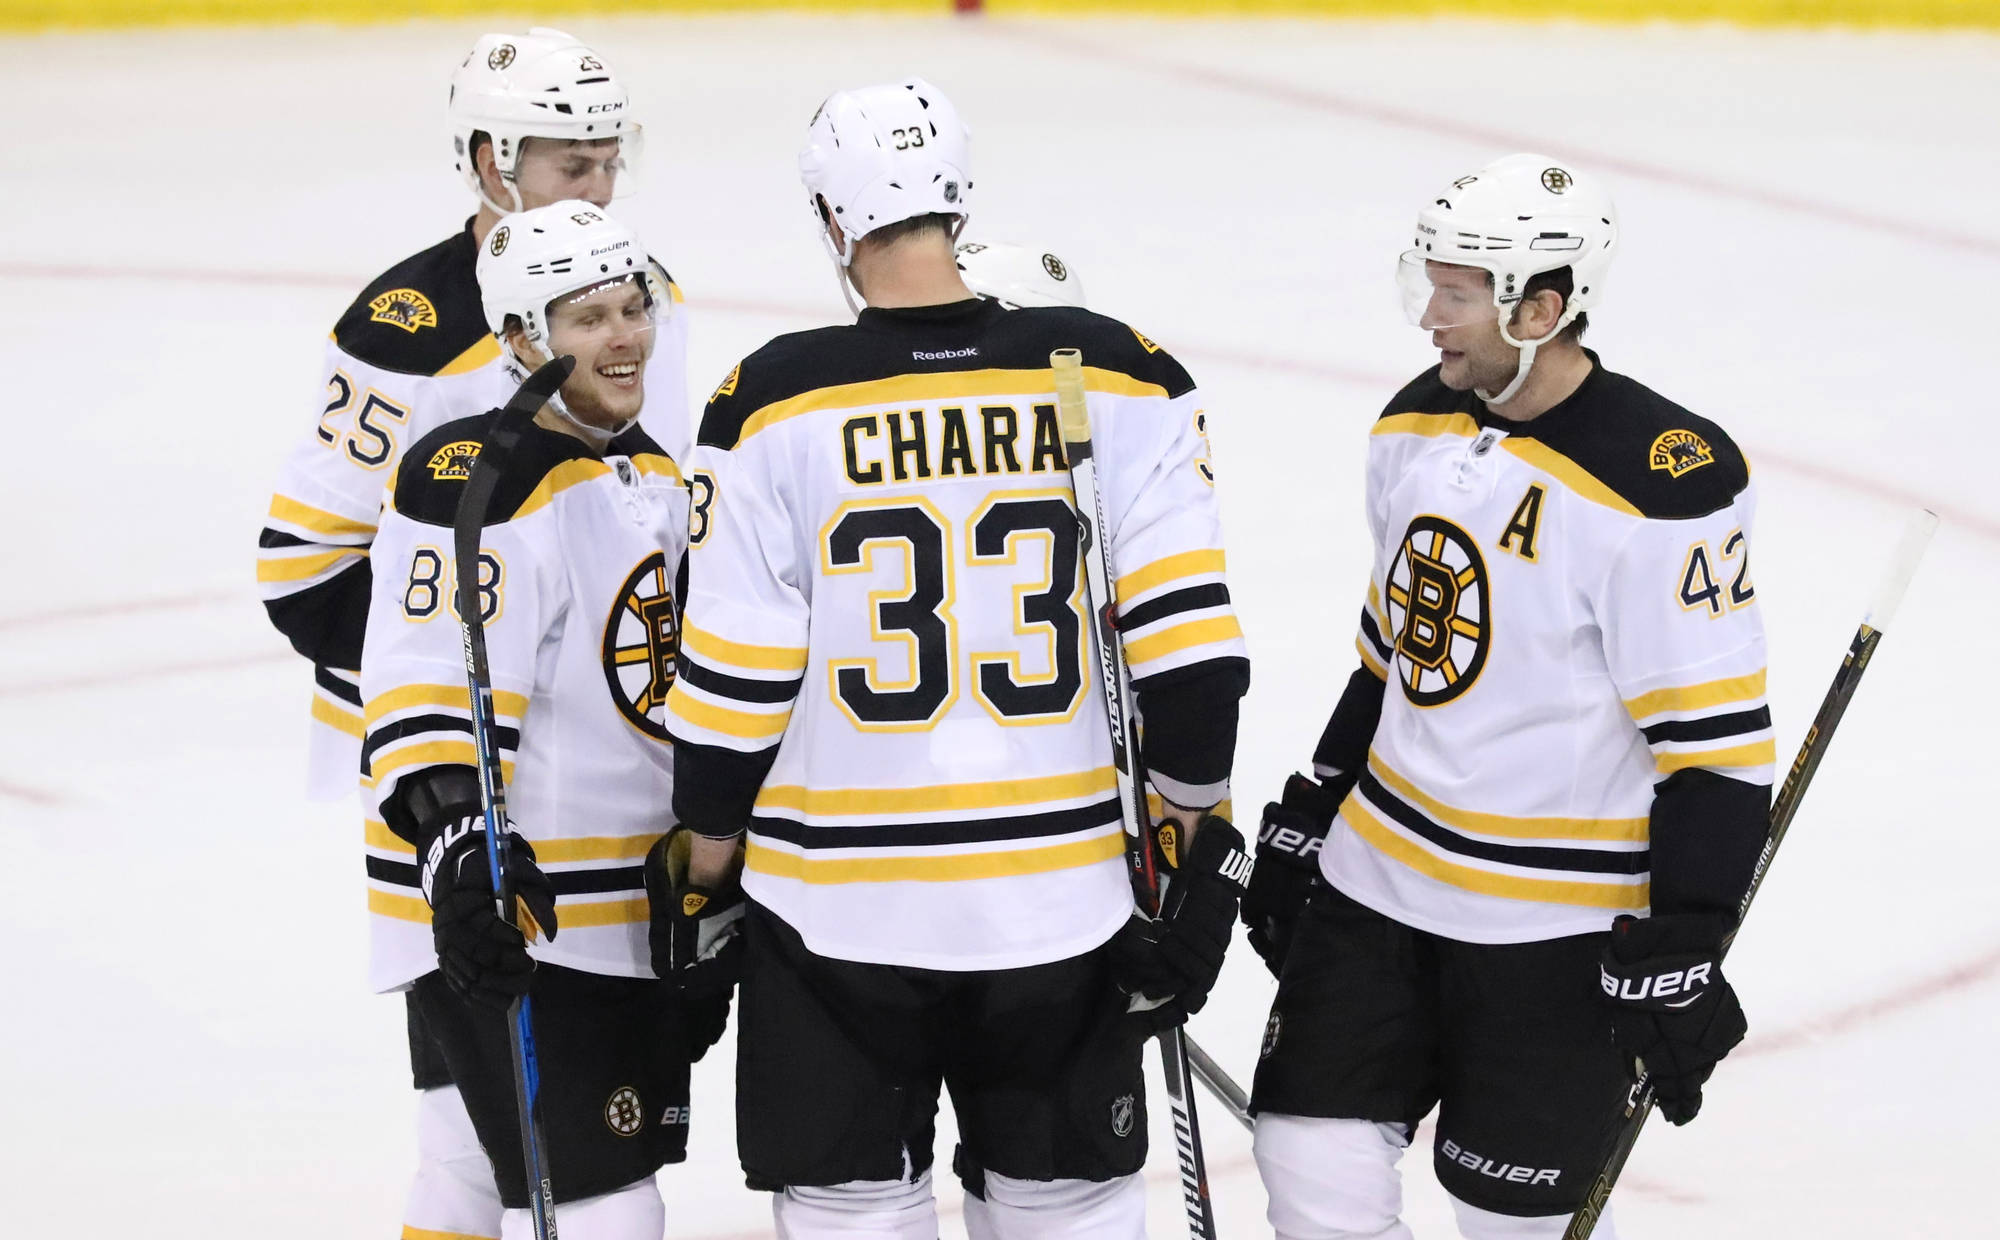 David Pastrnak Off to a Strong Start for Bruins